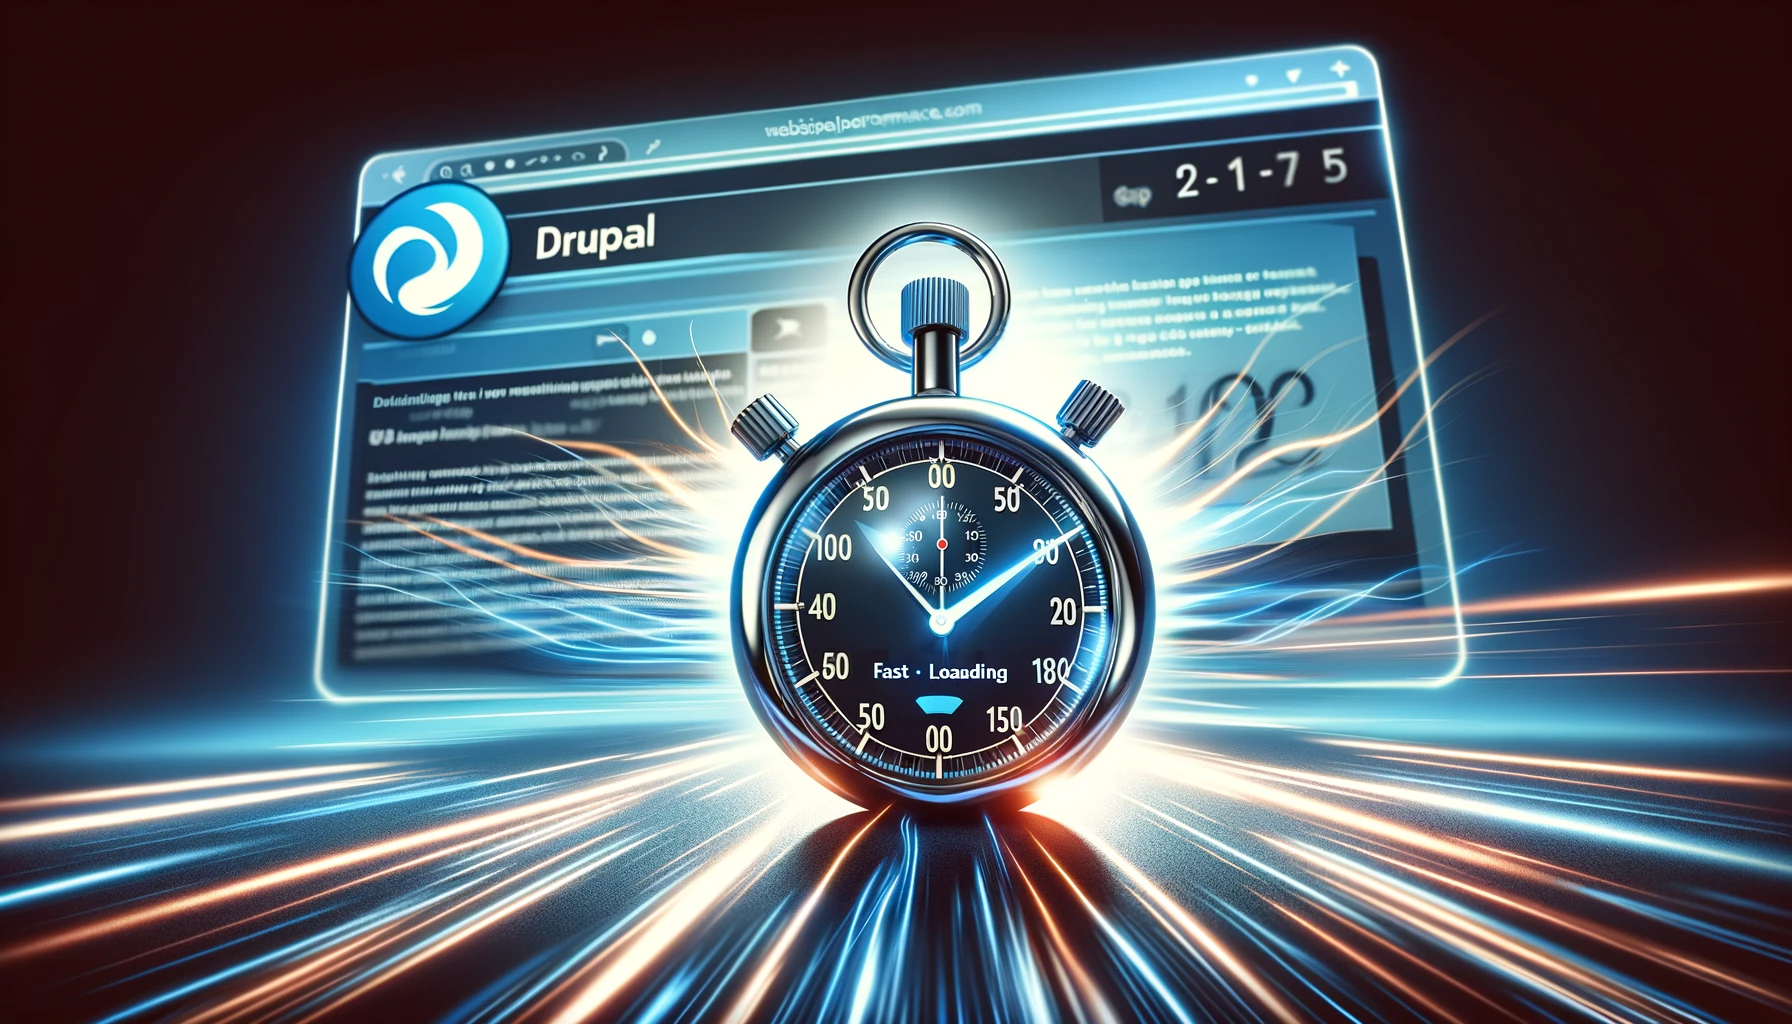 A conceptual illustration for an article about enhancing website performance using Drupal.